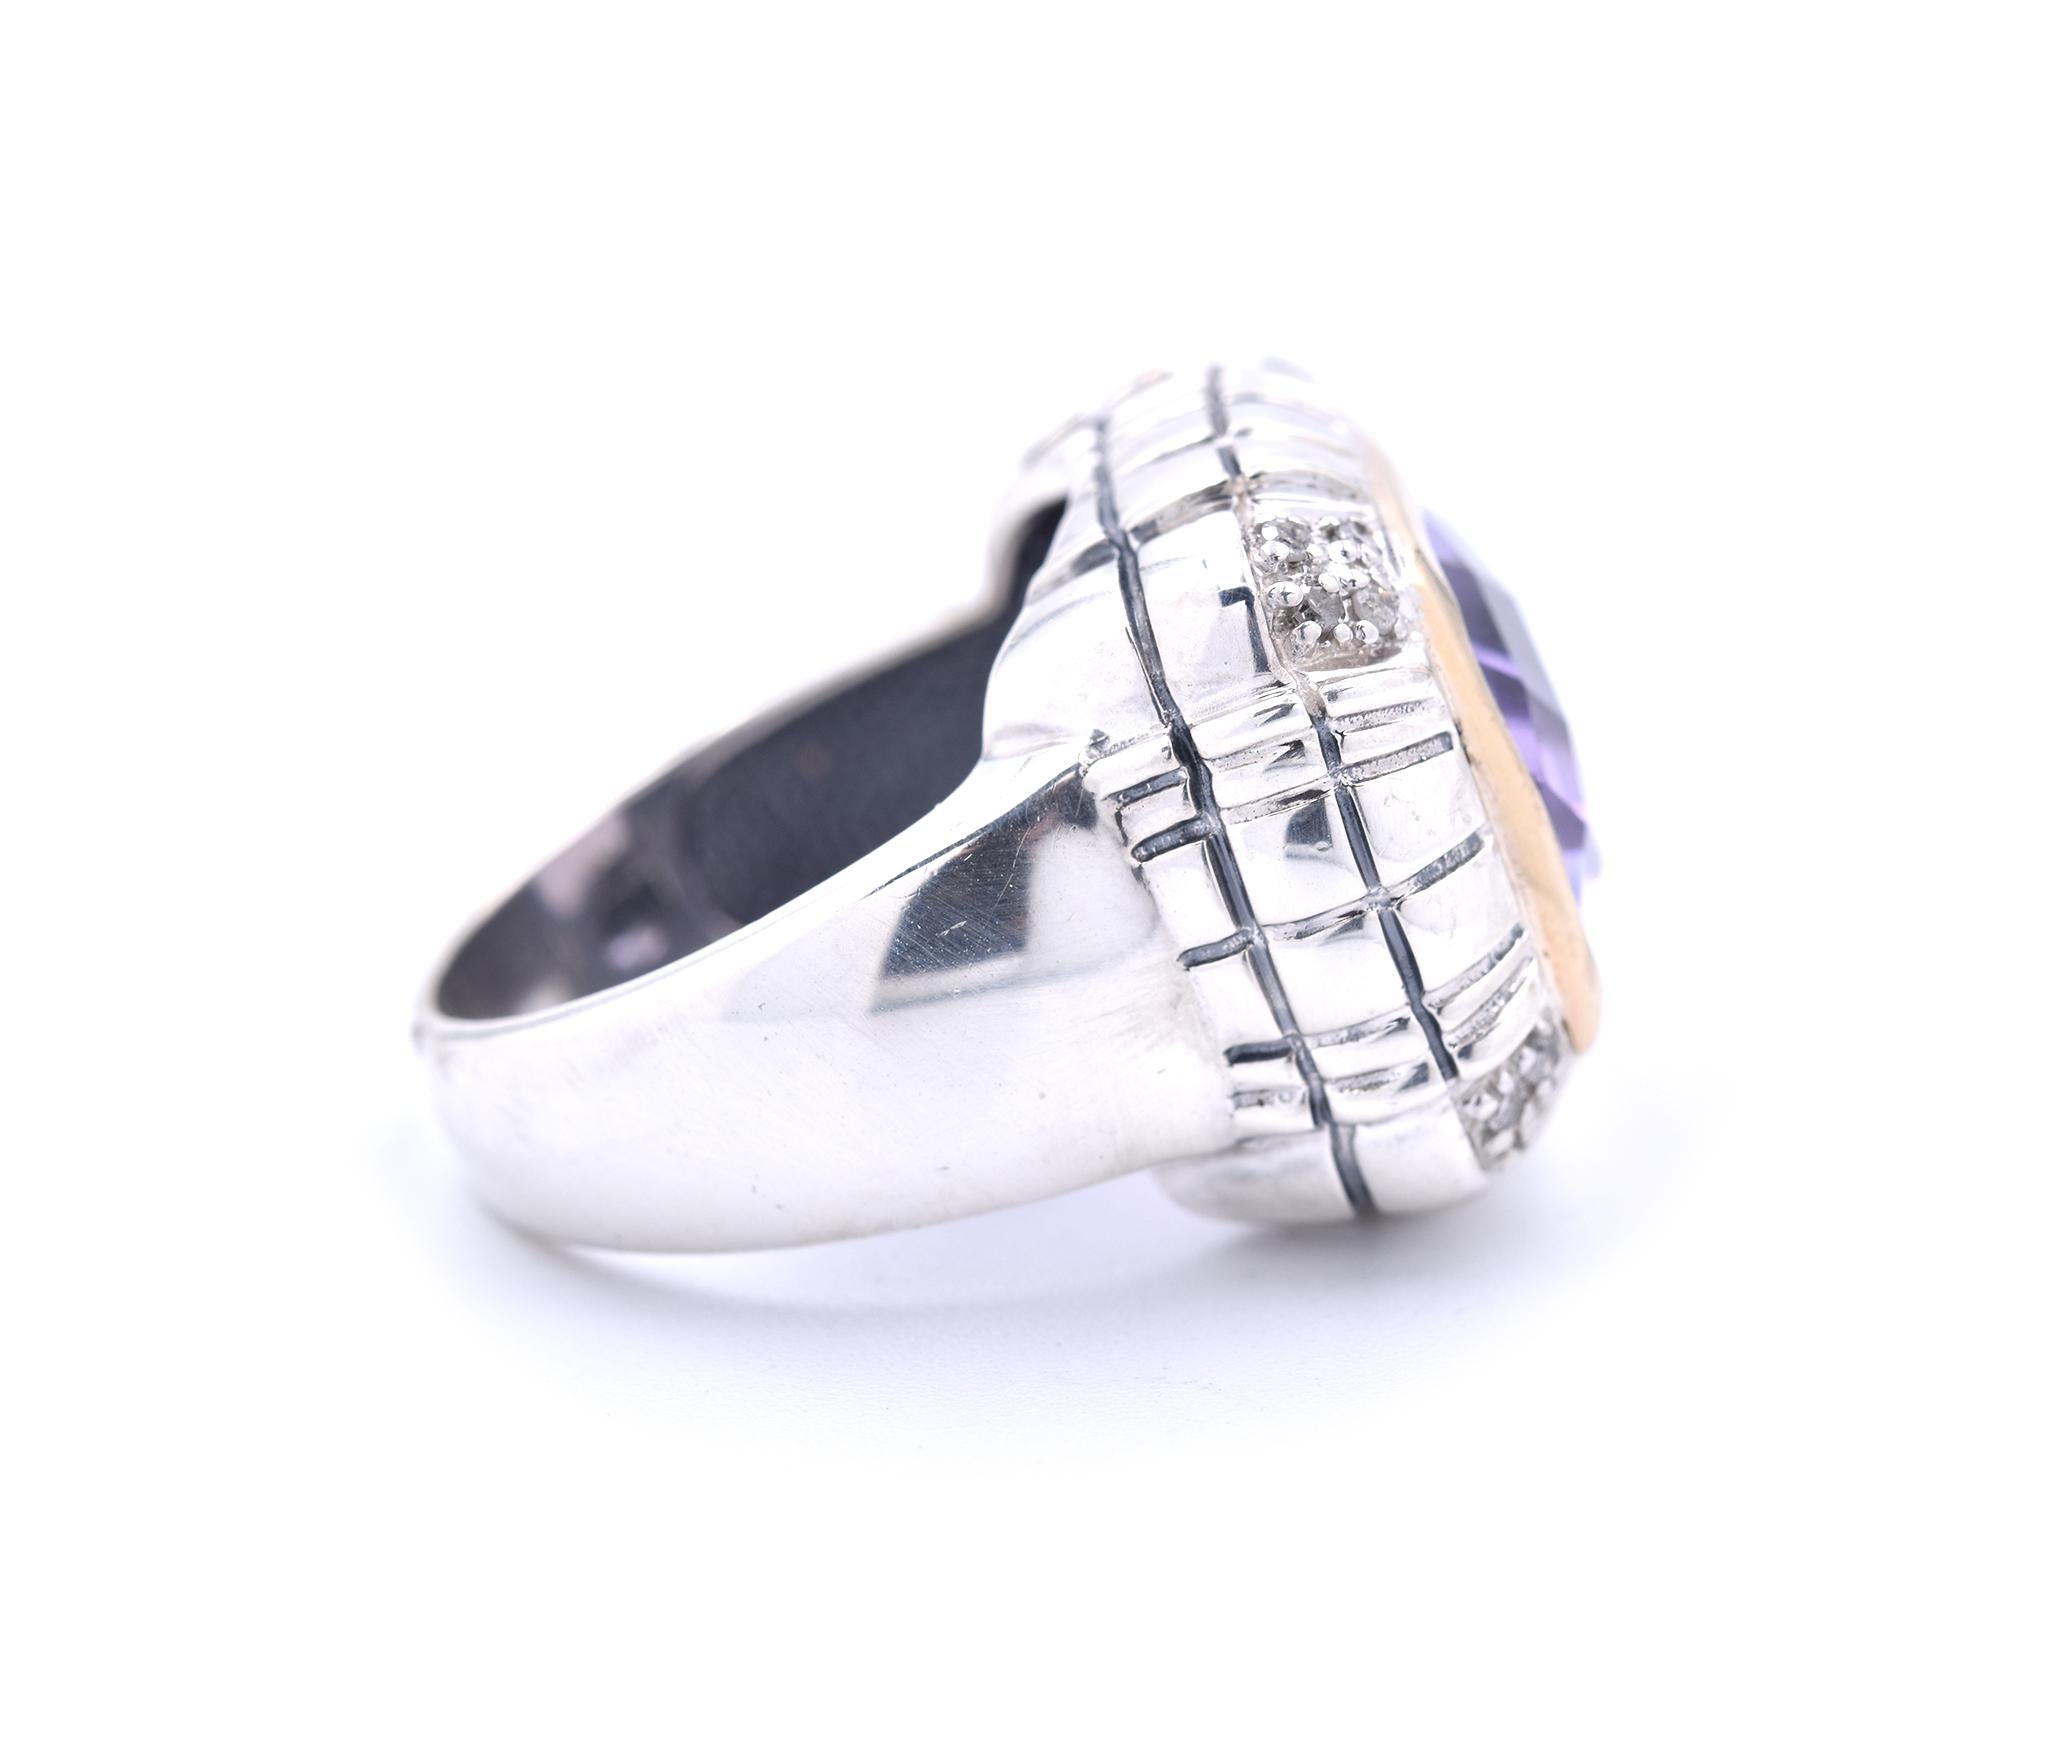 Designer: Custom Design
Material: sterling silver and 18k yellow gold
Ring Size: 7 (please allow 1-2 additional business days for sizing)
Dimensions: ring top measures 21mm x 17.80mm
Weight: 12.05 grams
